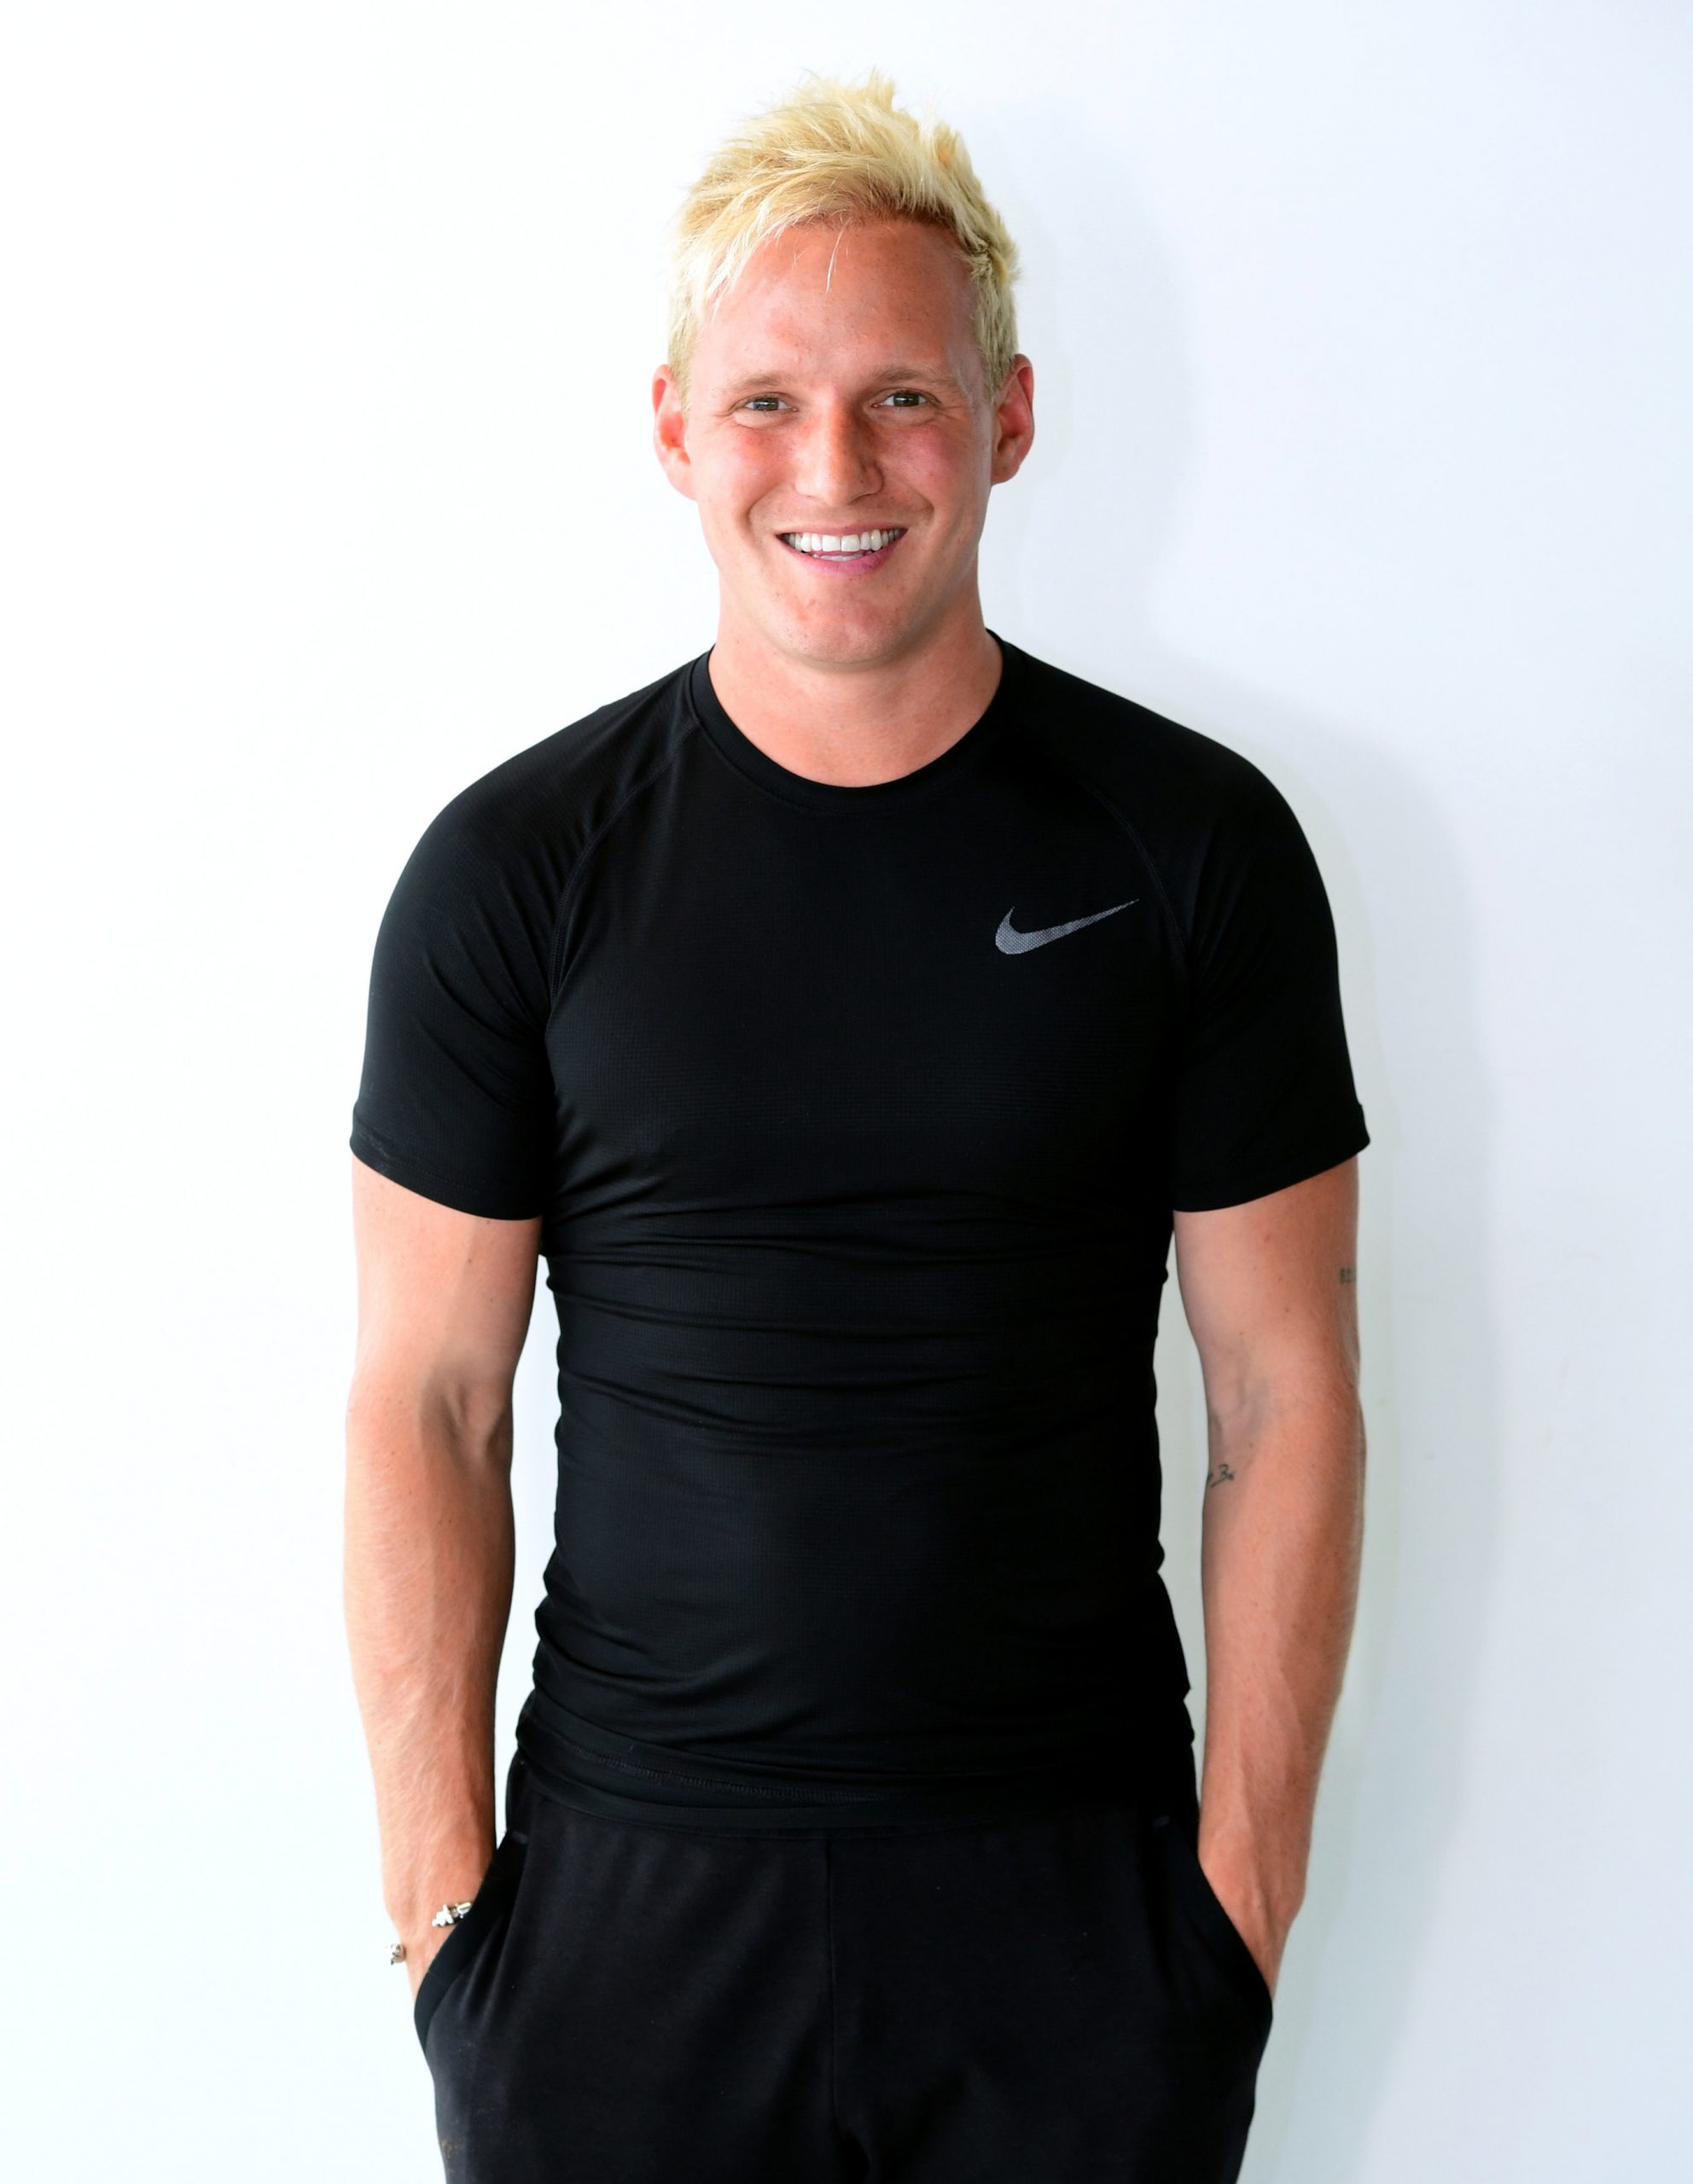 Radio 1 legend QUITS show and is replaced by Jamie Laing after ten years on the BBC